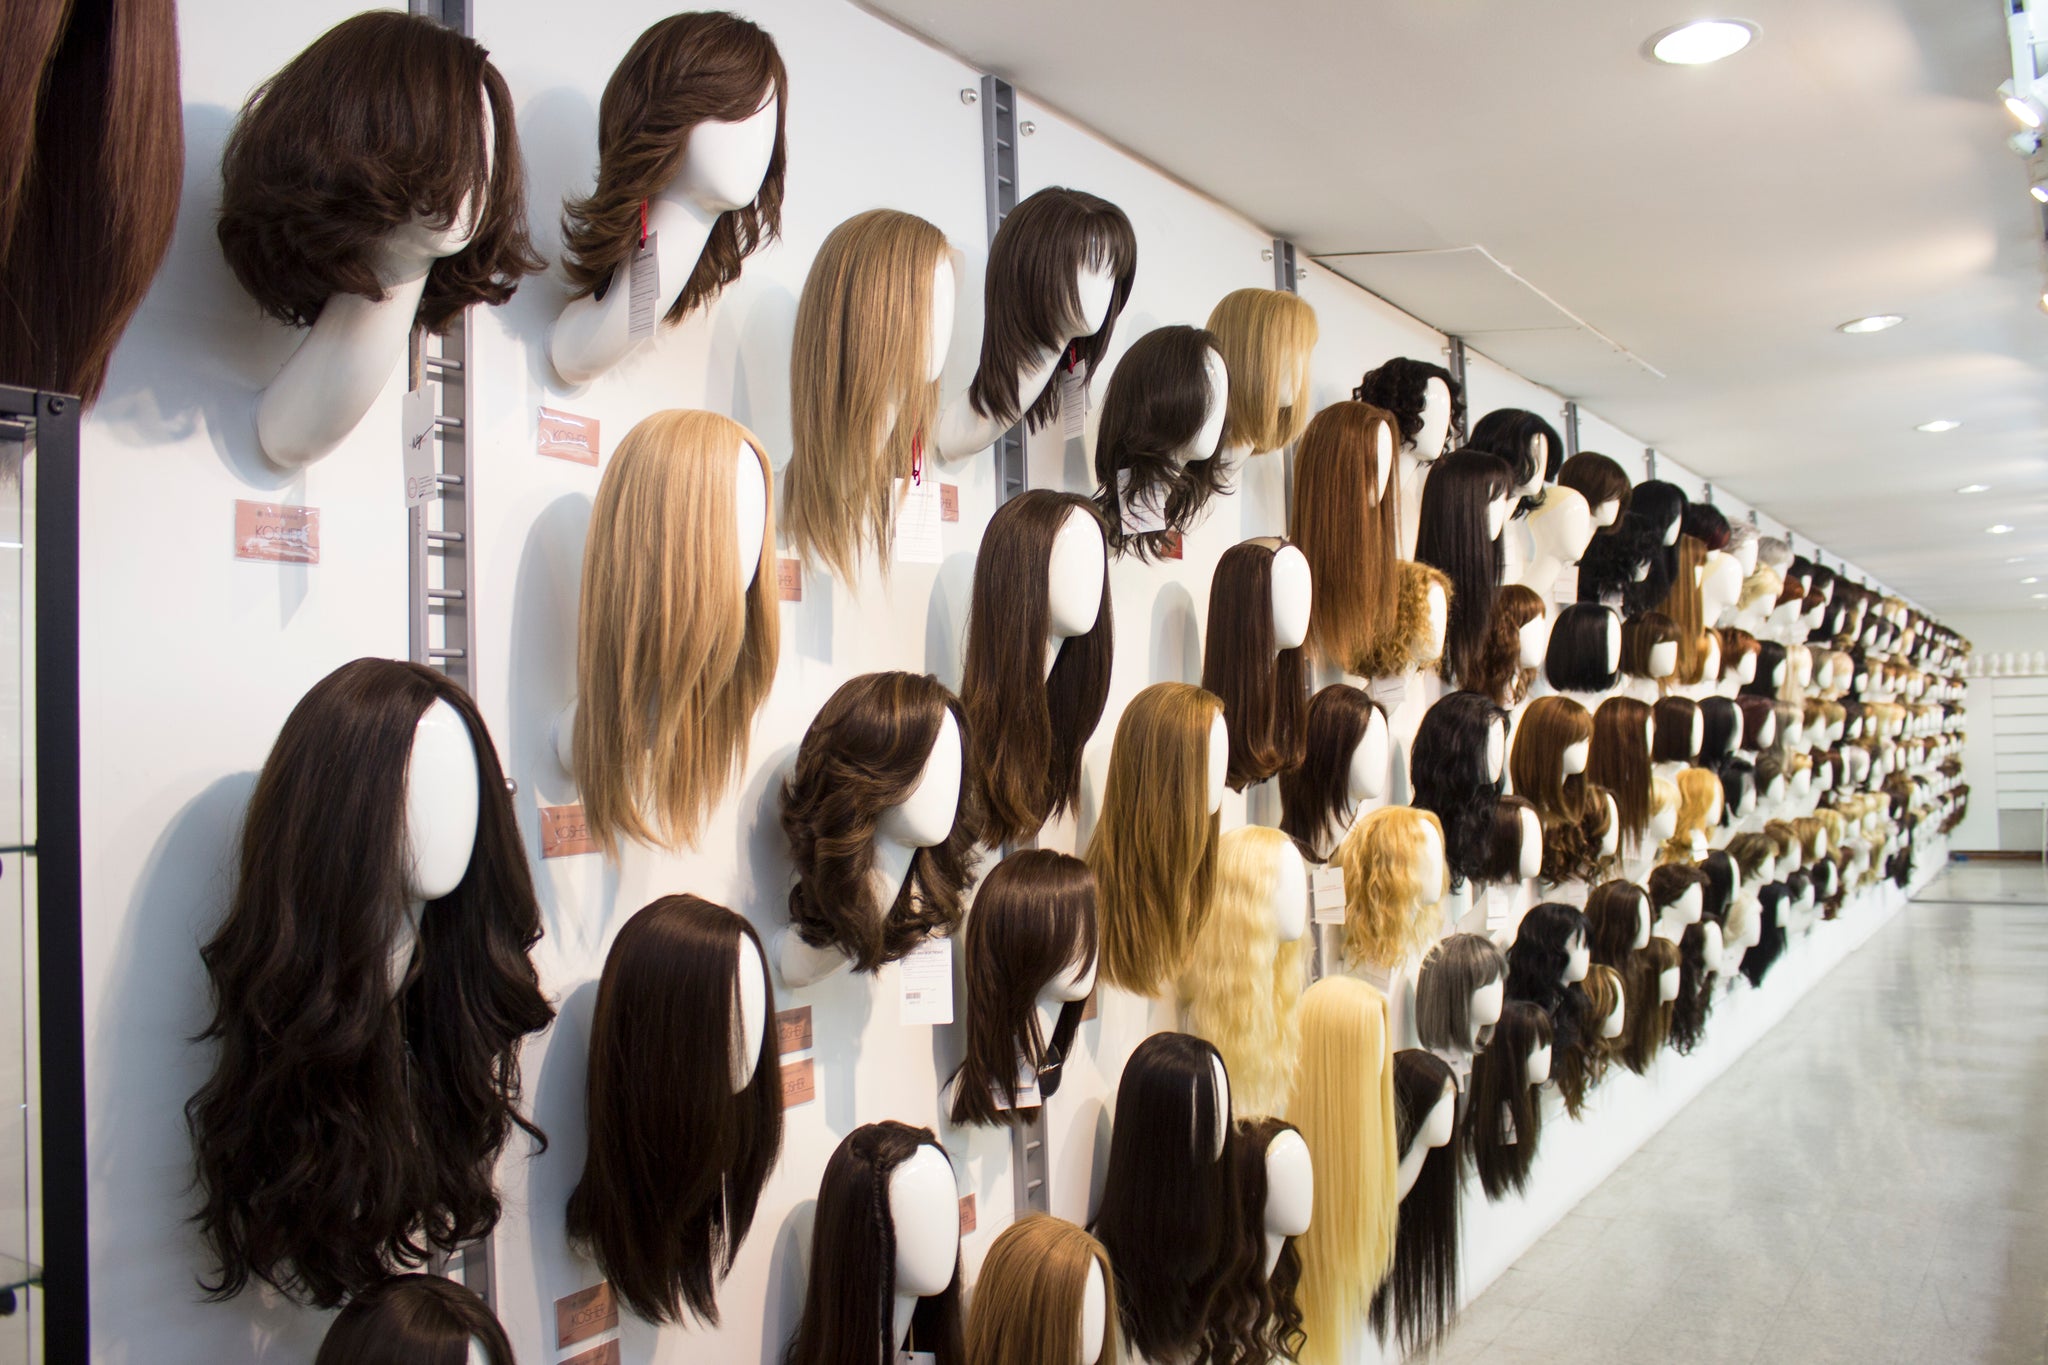 A large wall display of wig heads wearing wigs in different colors